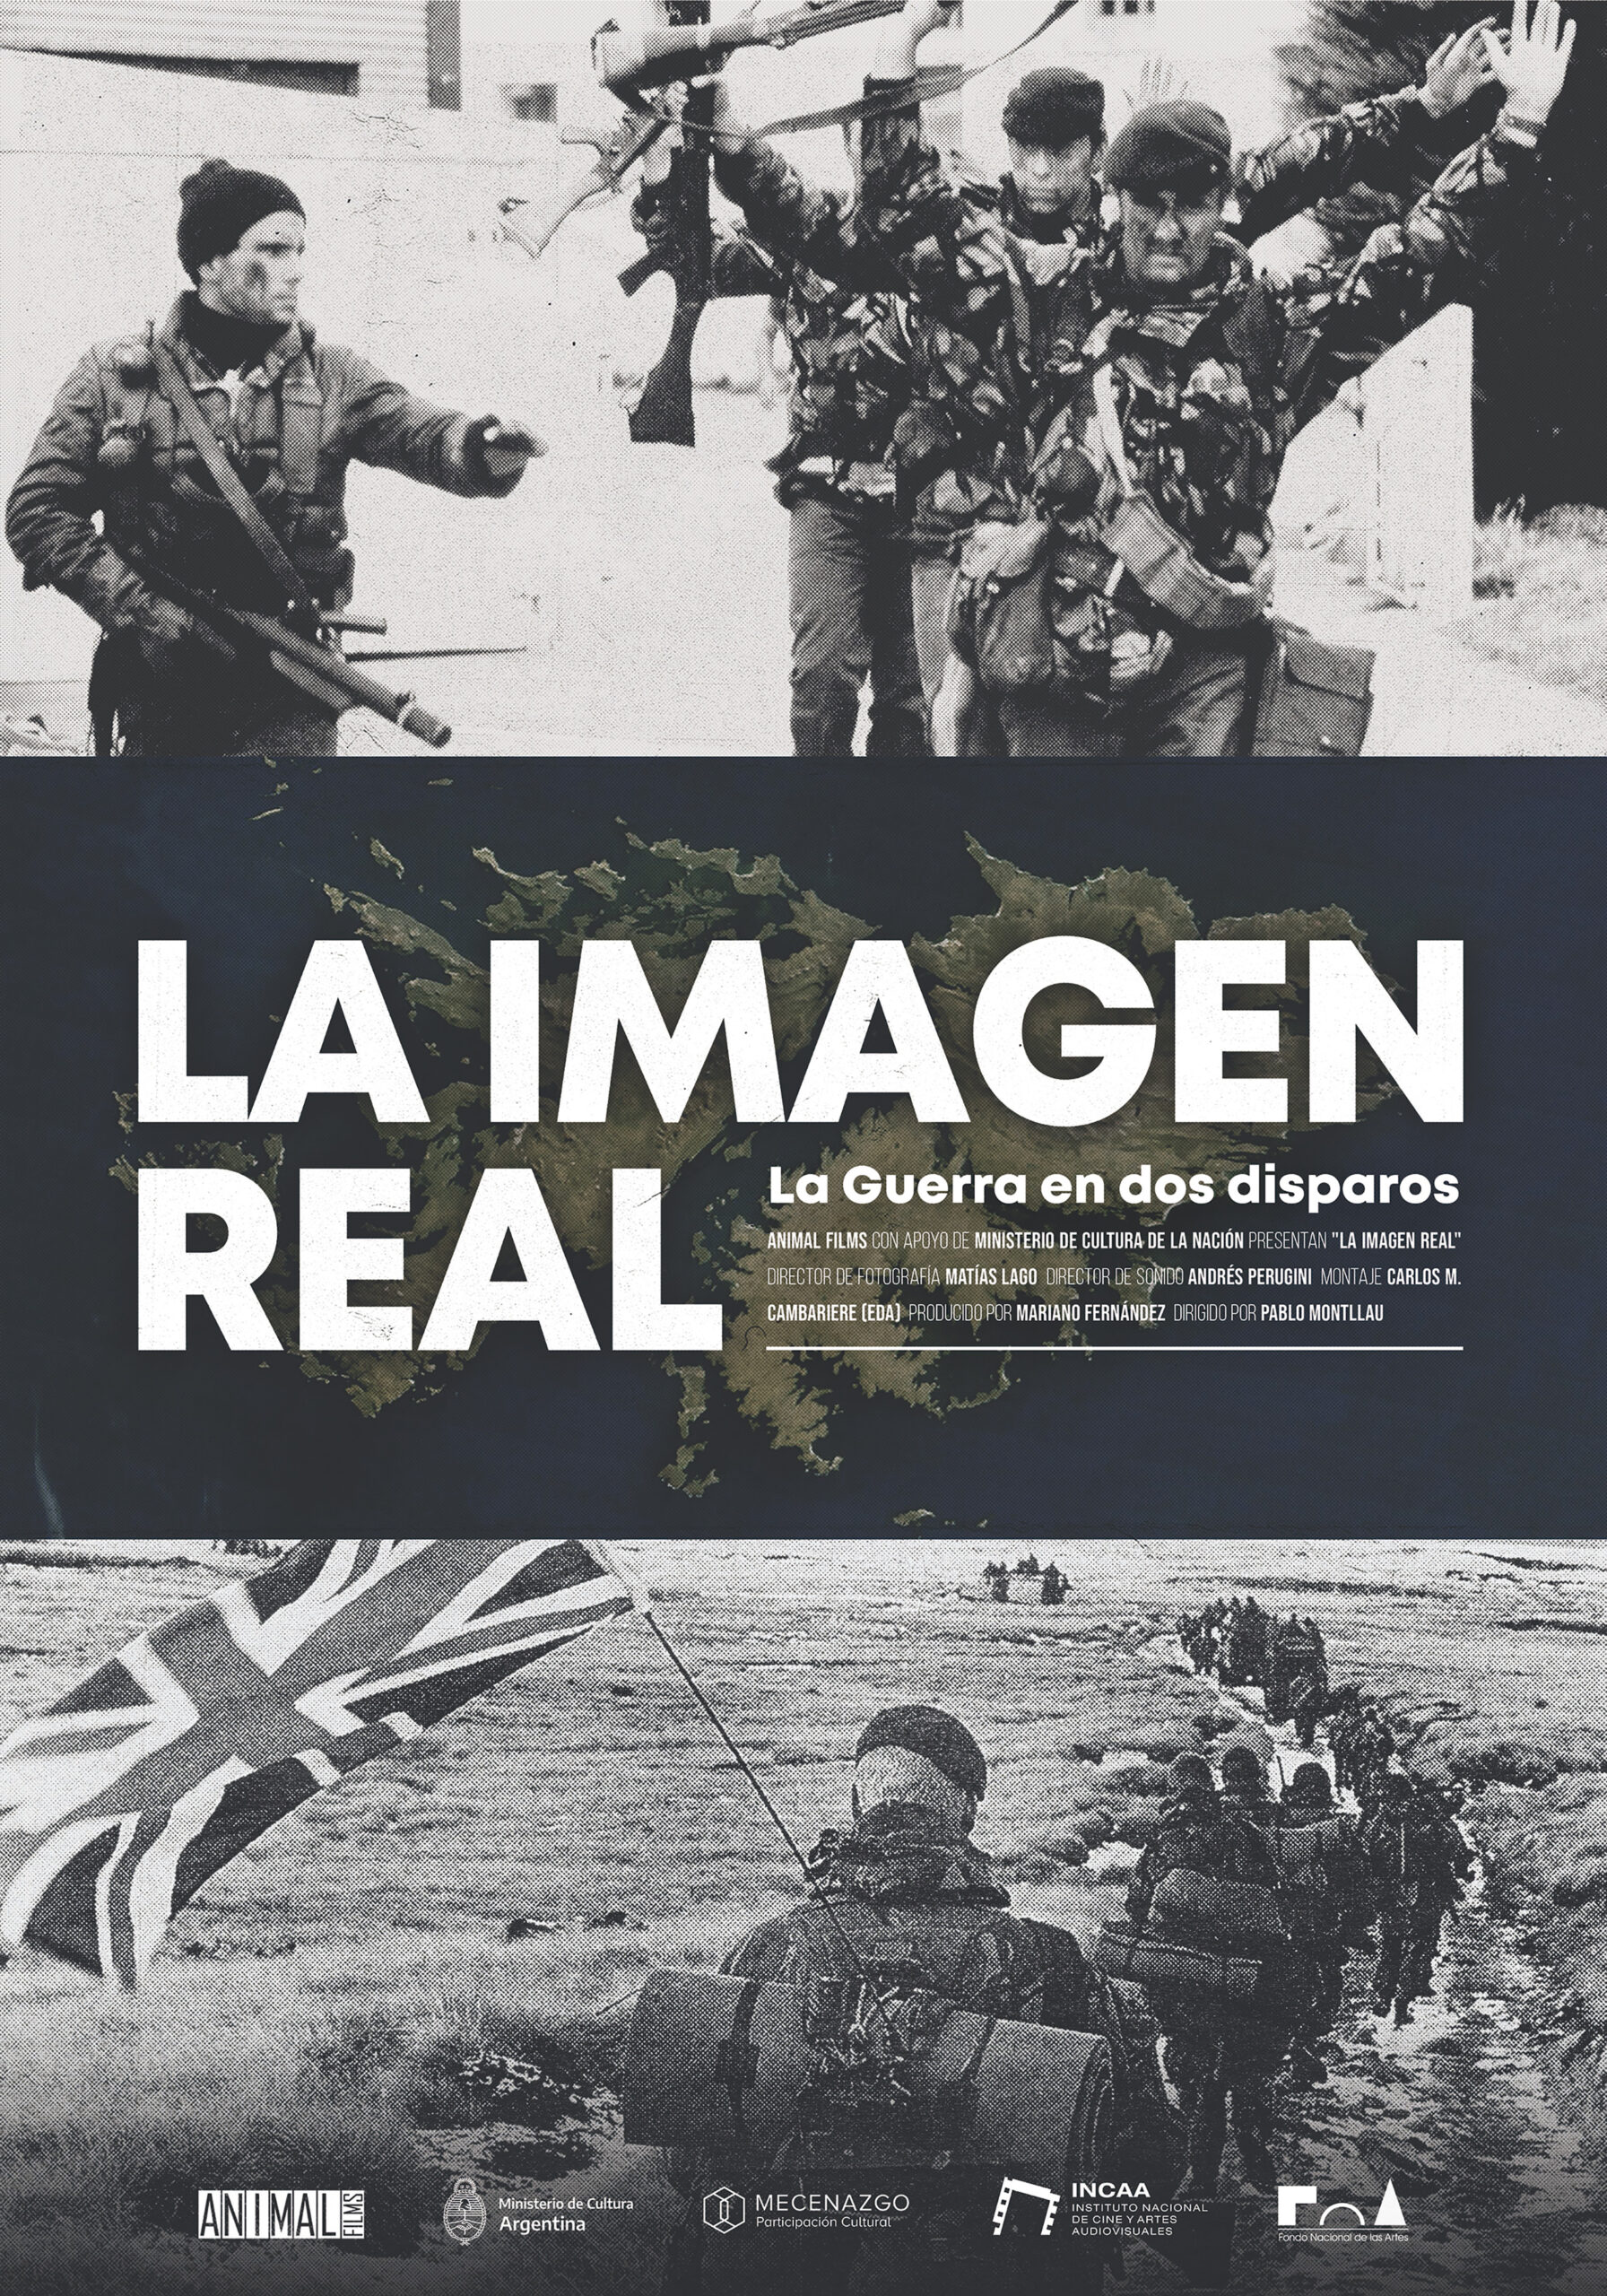 La Imagen Real (The Real Image)